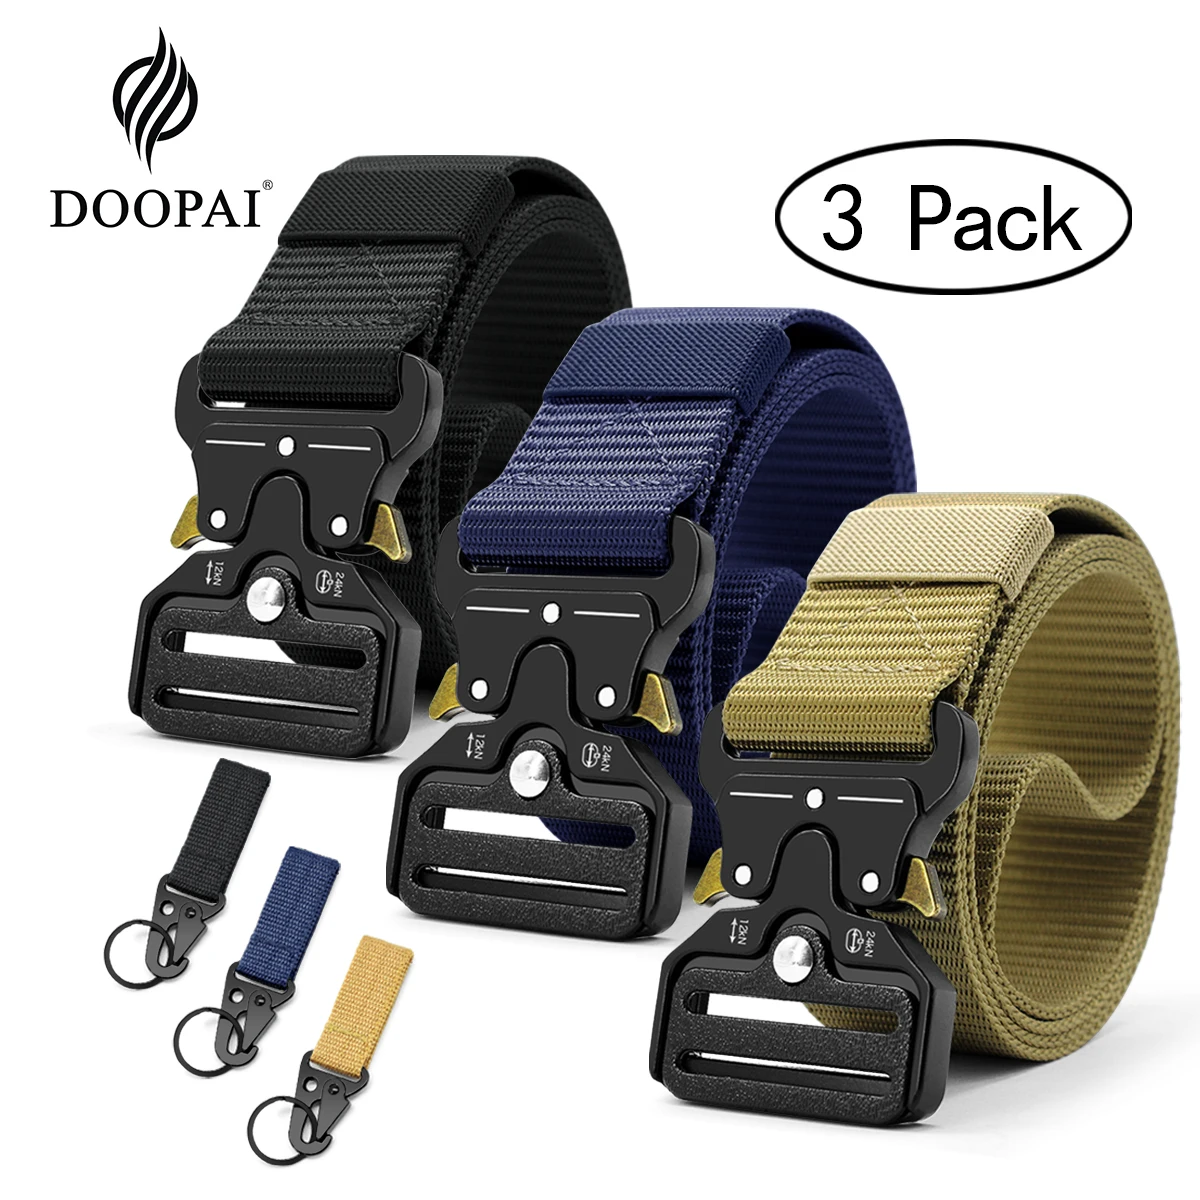 DOOPAI Tactical Army Men's Belt Military Nylon Outdoor Police Heavy Duty Training Hunting Combat Belt For Men 125/135CM/Wide 3.8